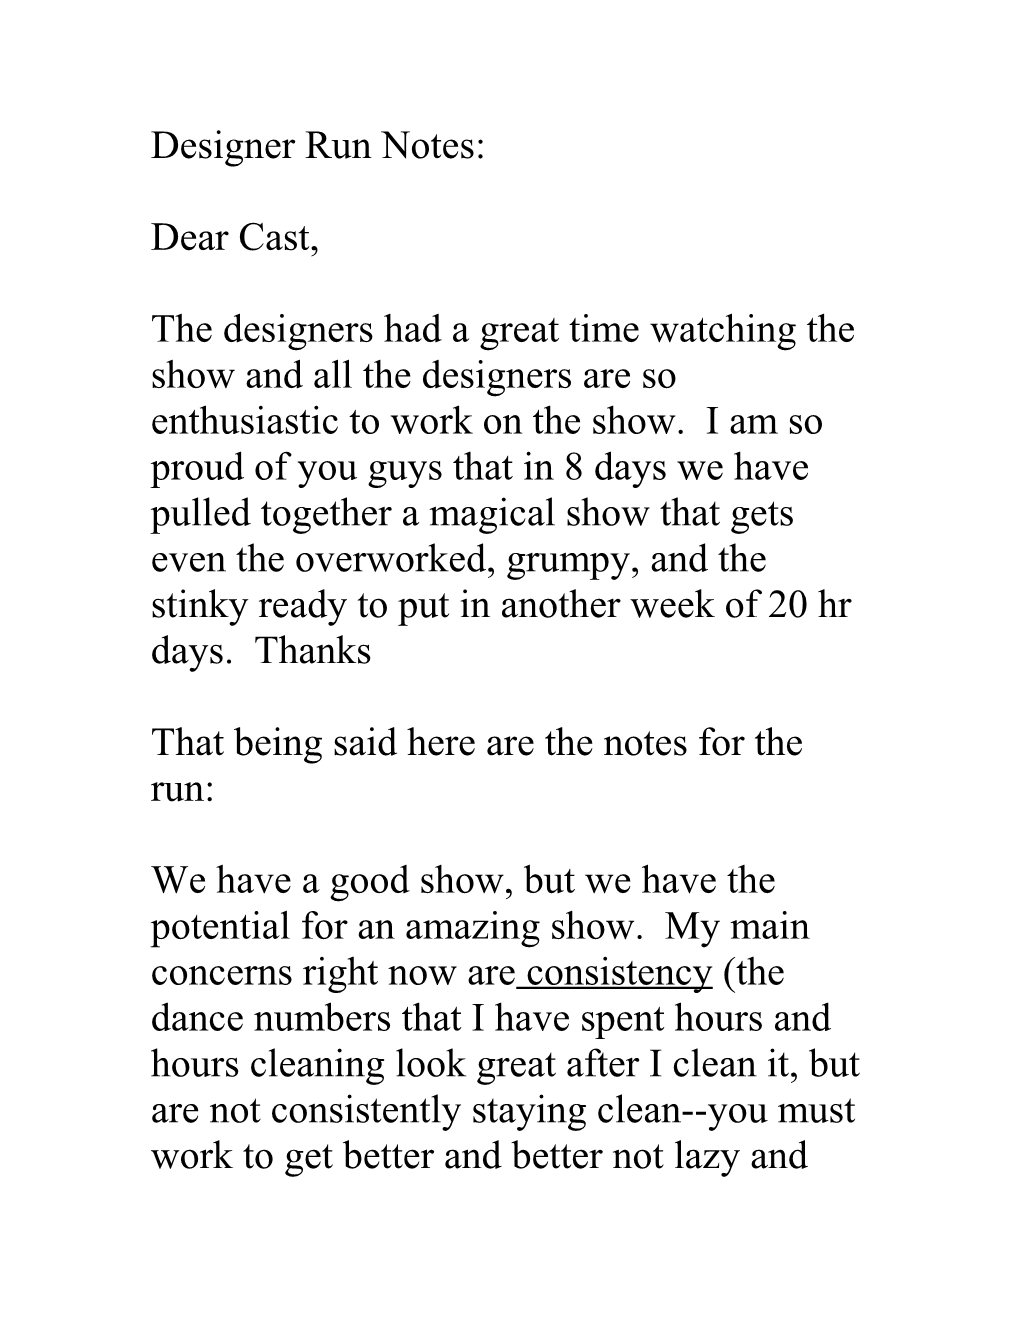 Designer Run Notes: Dear Cast, the Designers Had a Great Time Watching the Show and All